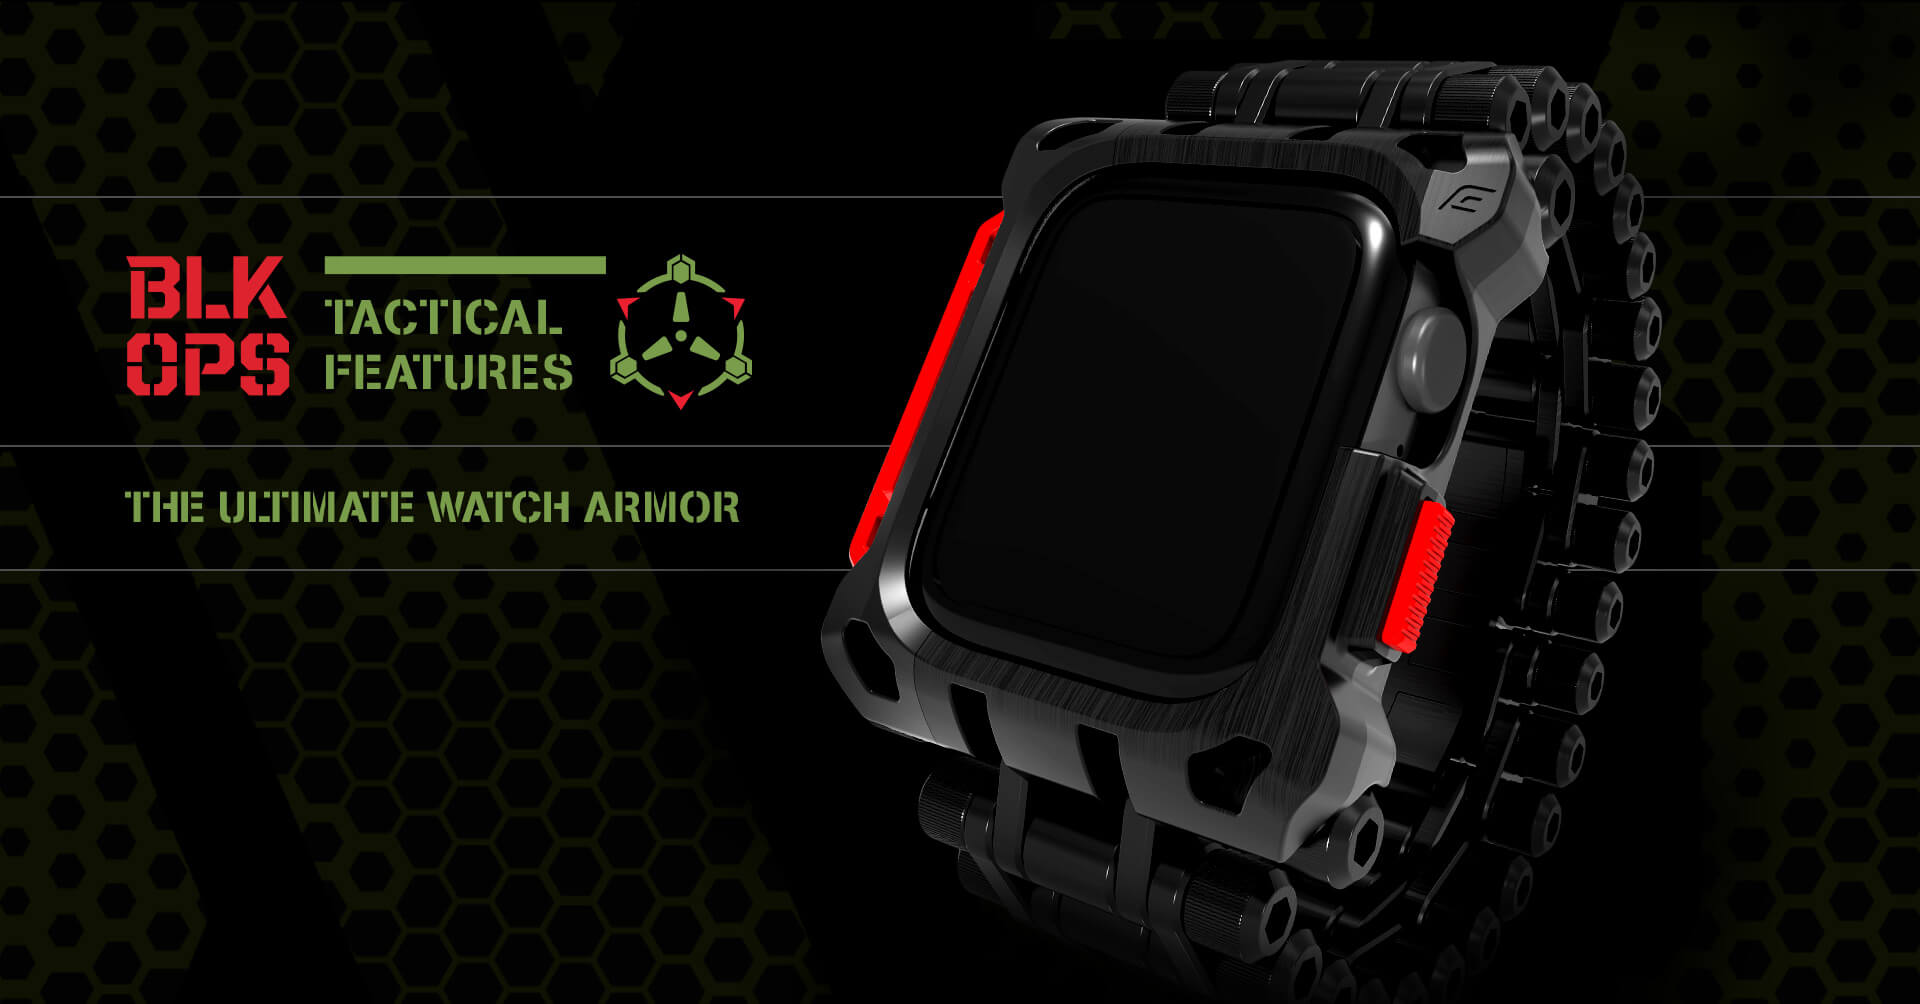 Black Ops Tactical Features – The Ultimate Watch Armor